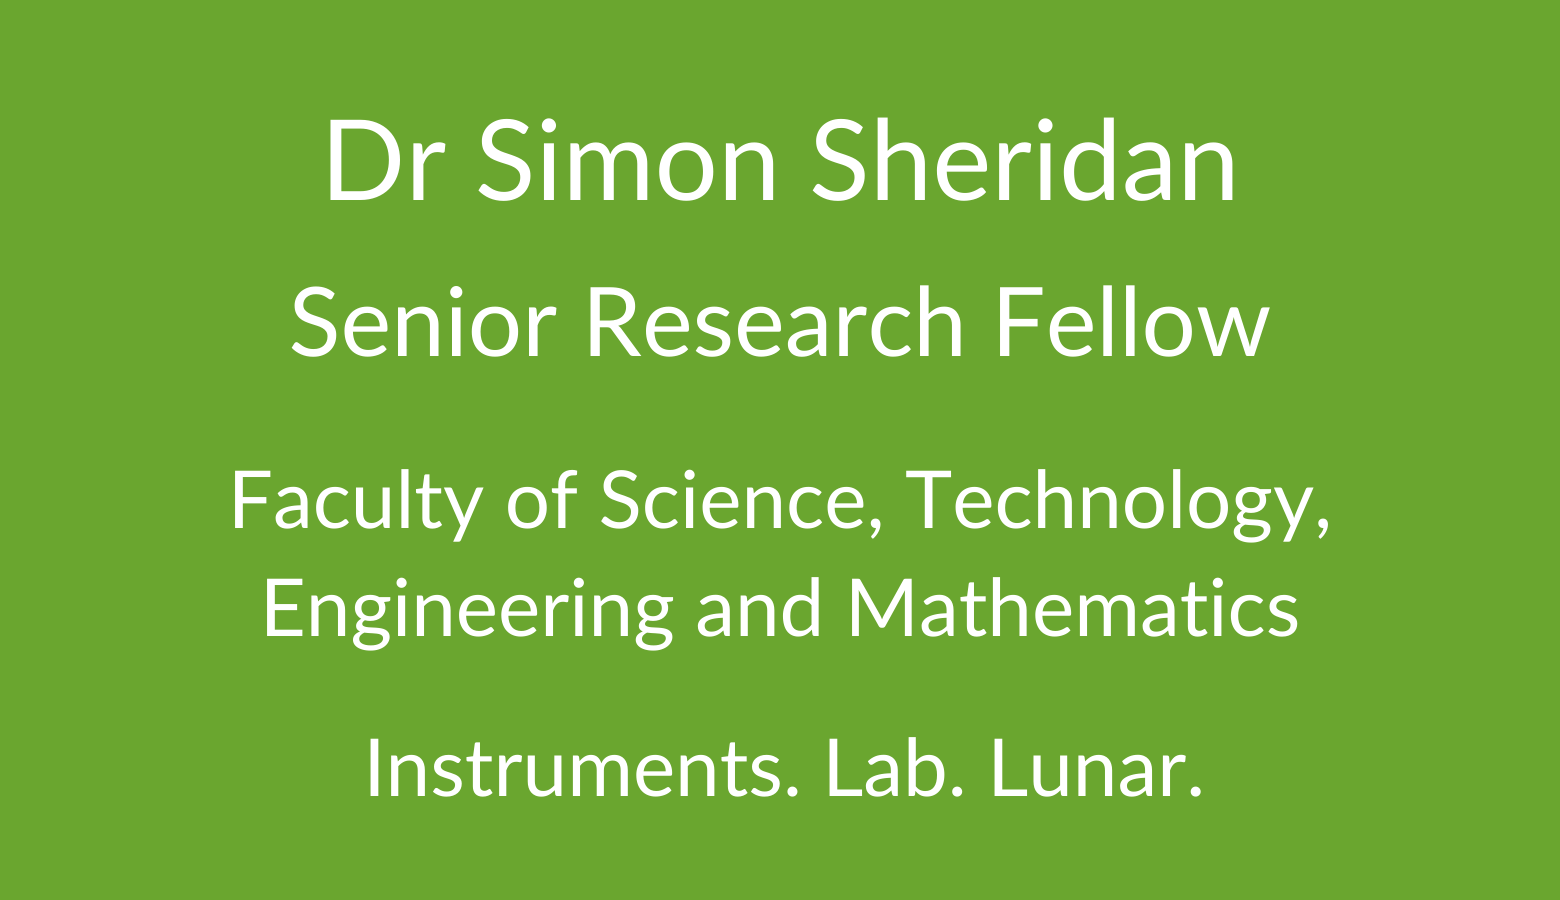 Dr Simon Sheridan. Senior Research Fellow. Faculty of Science. Technology, Engineering and Mathematics. Instruments. Lab. Lunar.